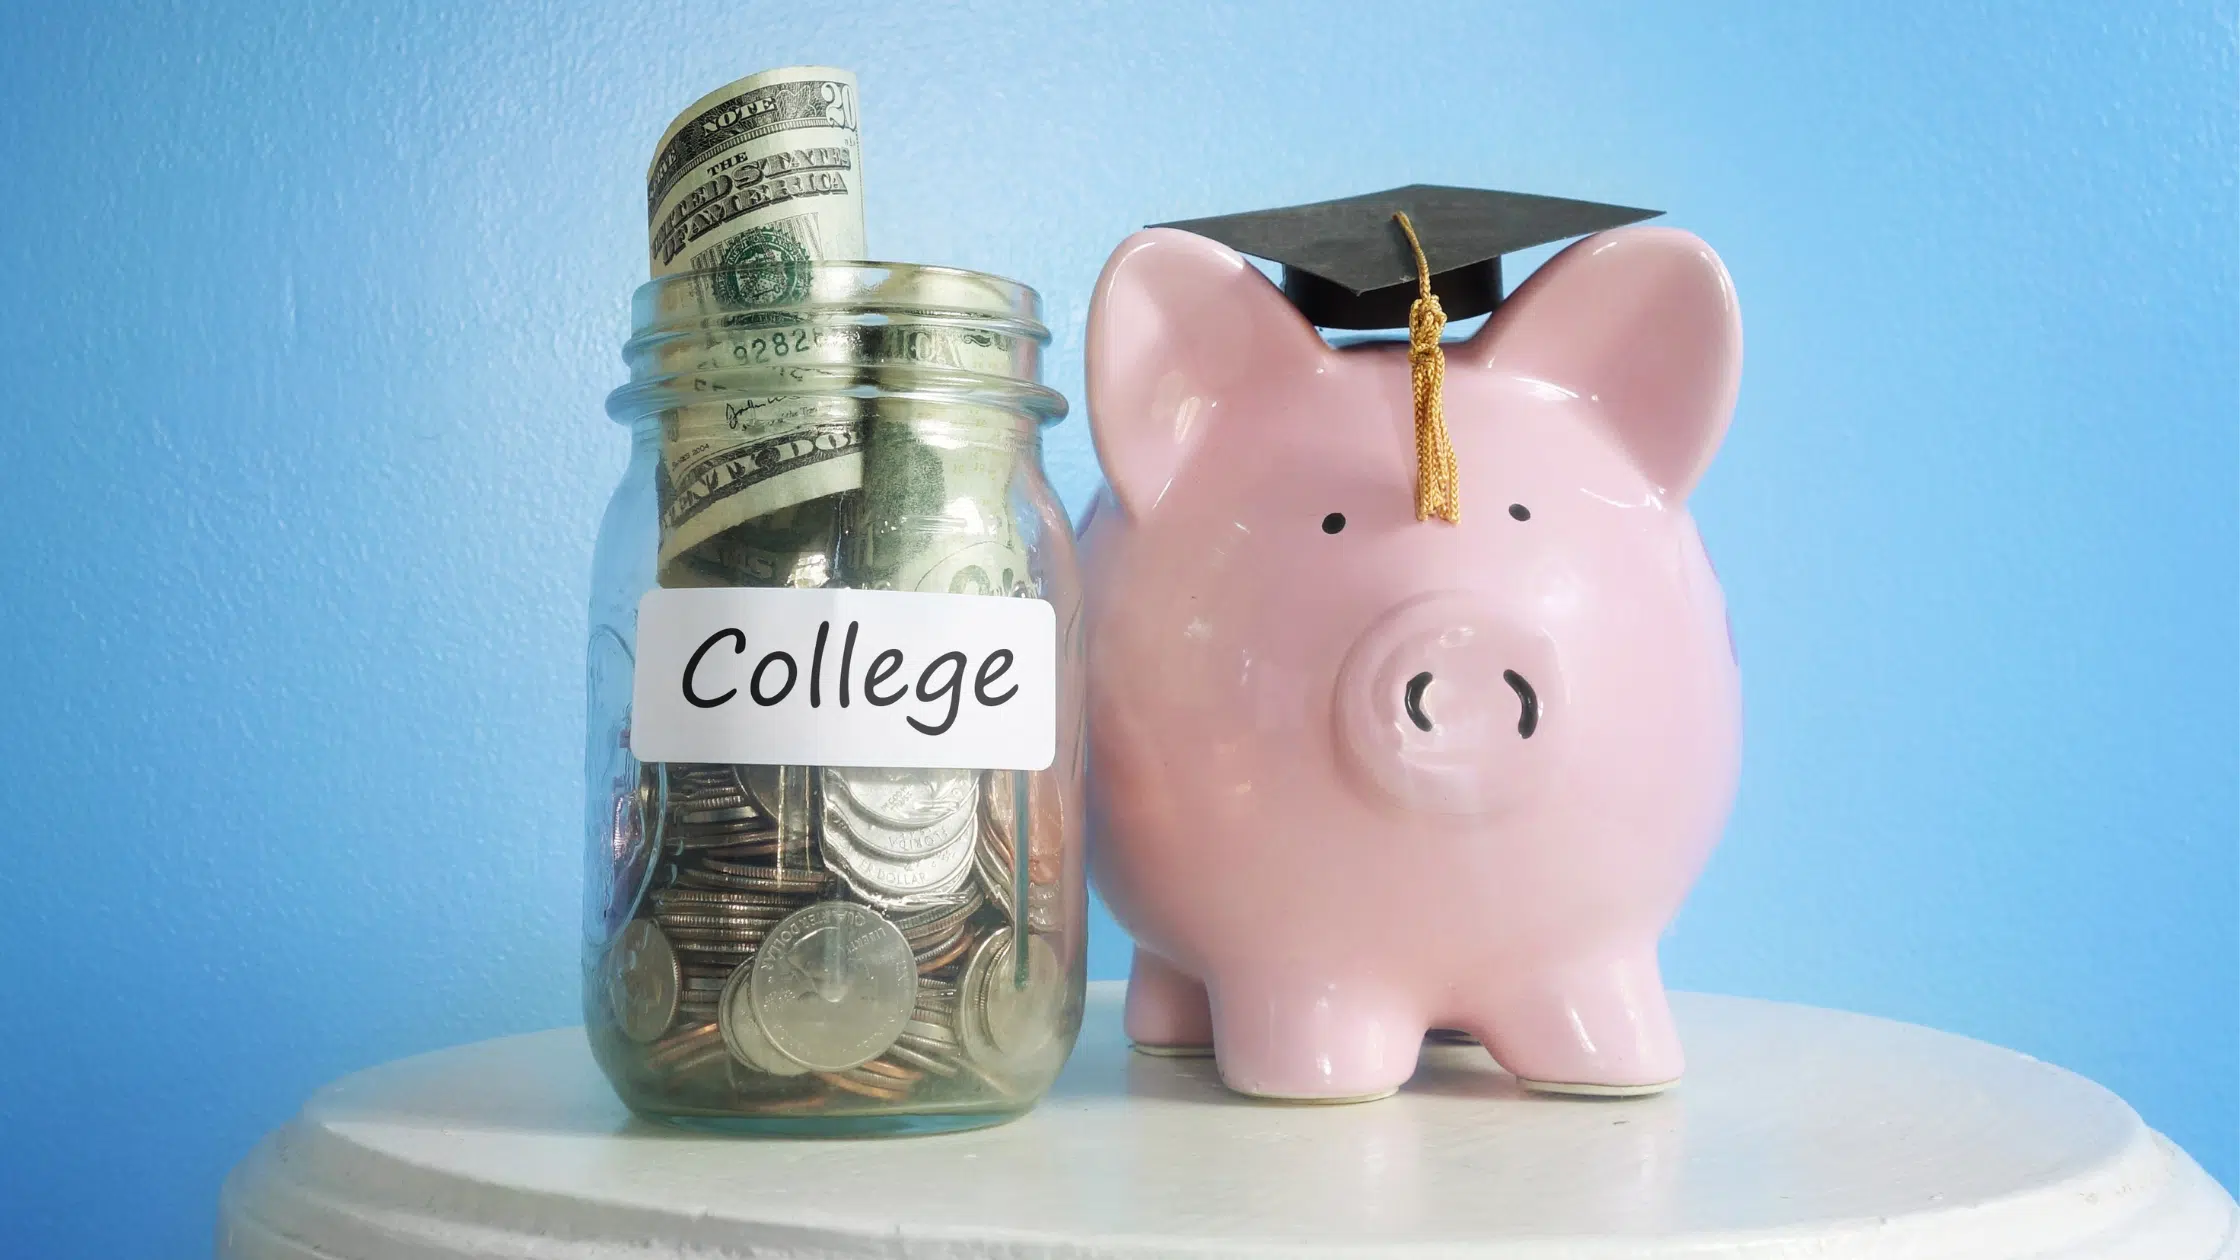 How Much Has College Tuition Increased In The Last 10 Years